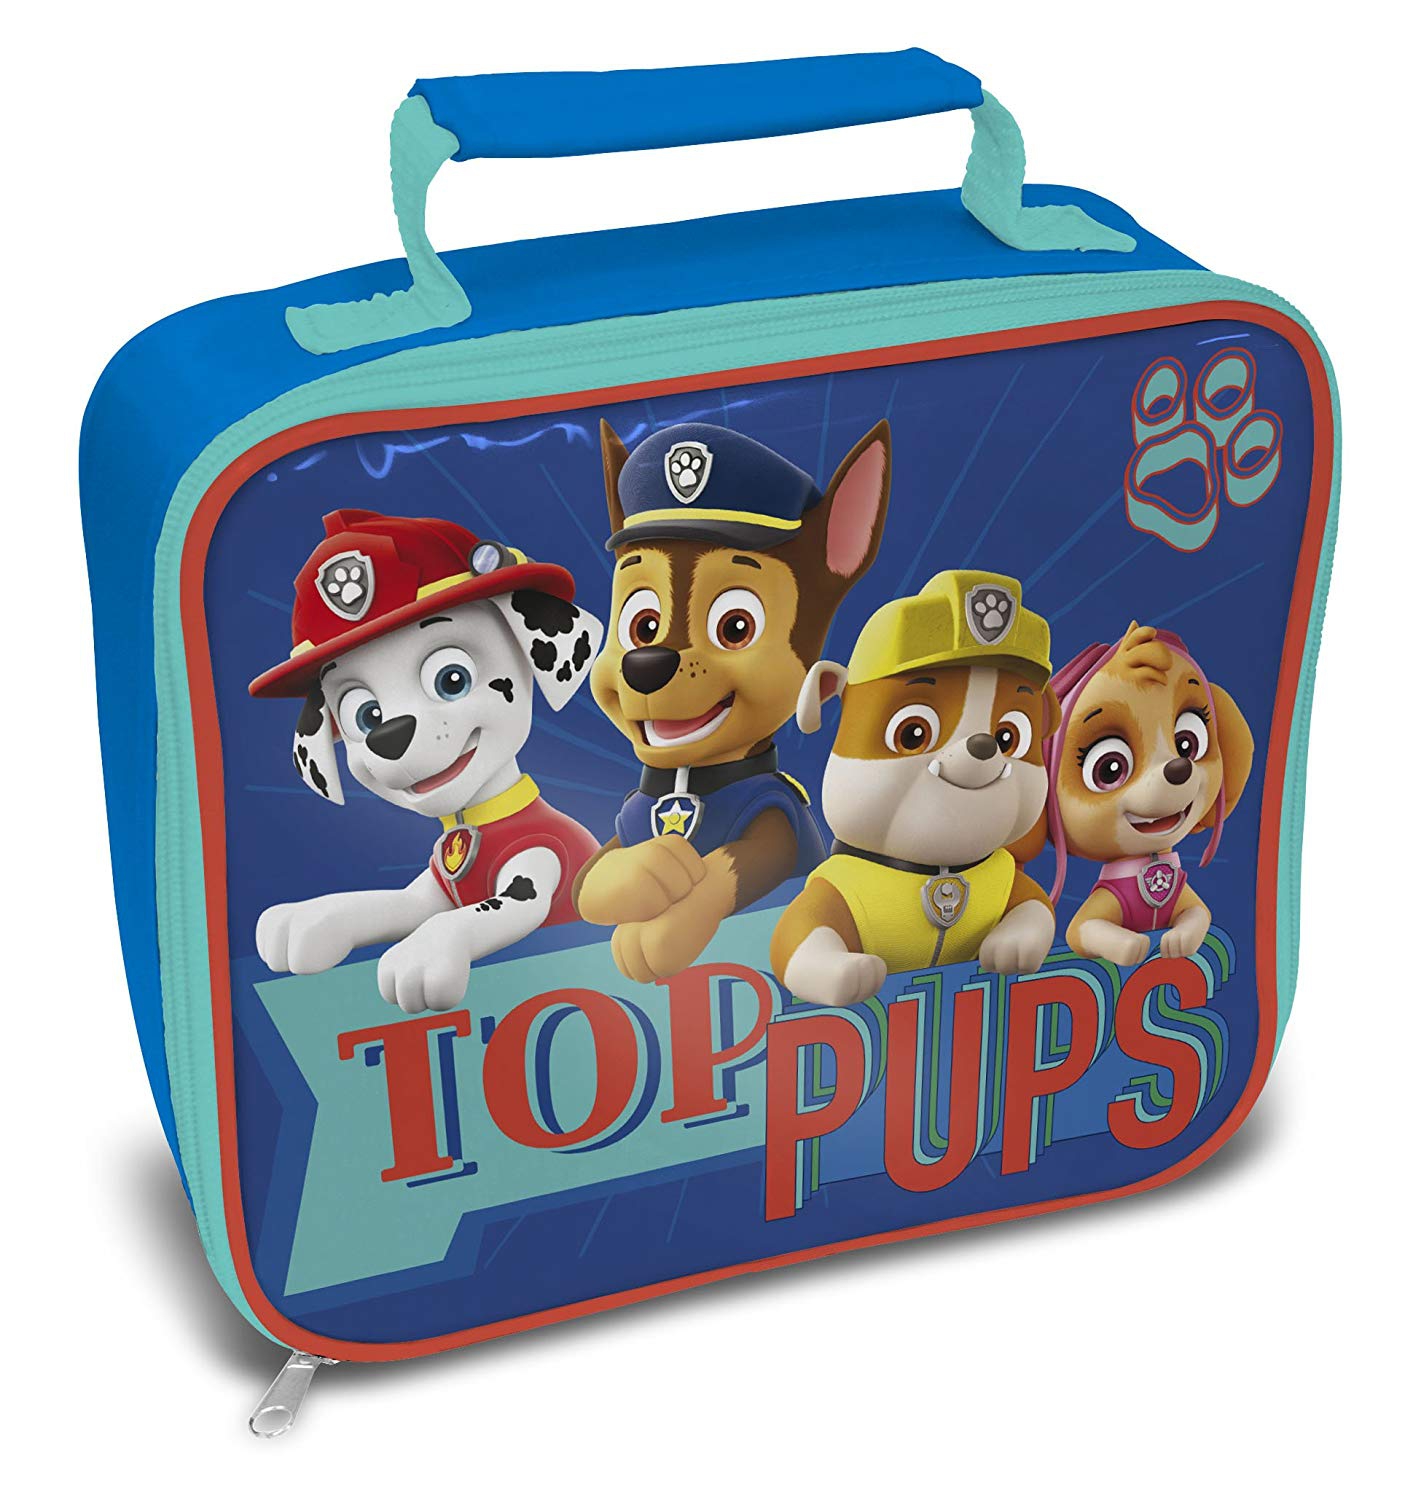 Paw Patrol Top Pups School Rectangle Lunch Bag